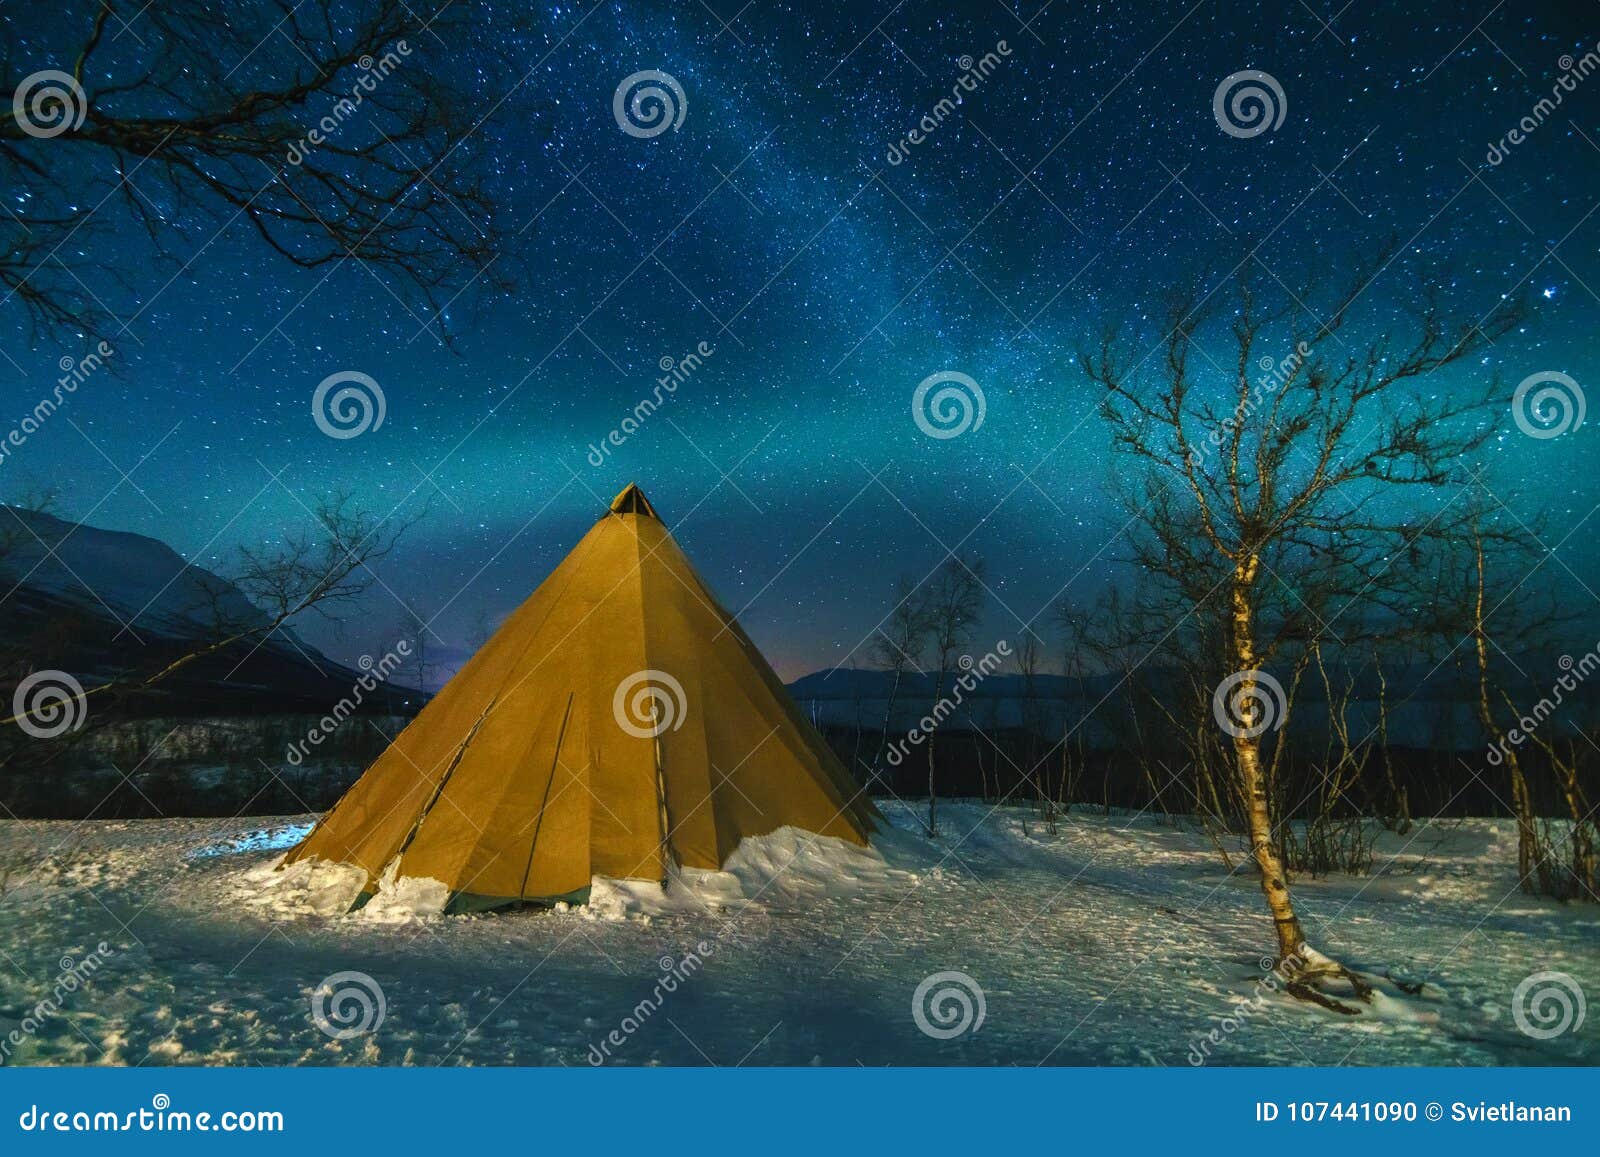 Winter Landscape with Eskimo Tent and Northern Lights. Stock Photo